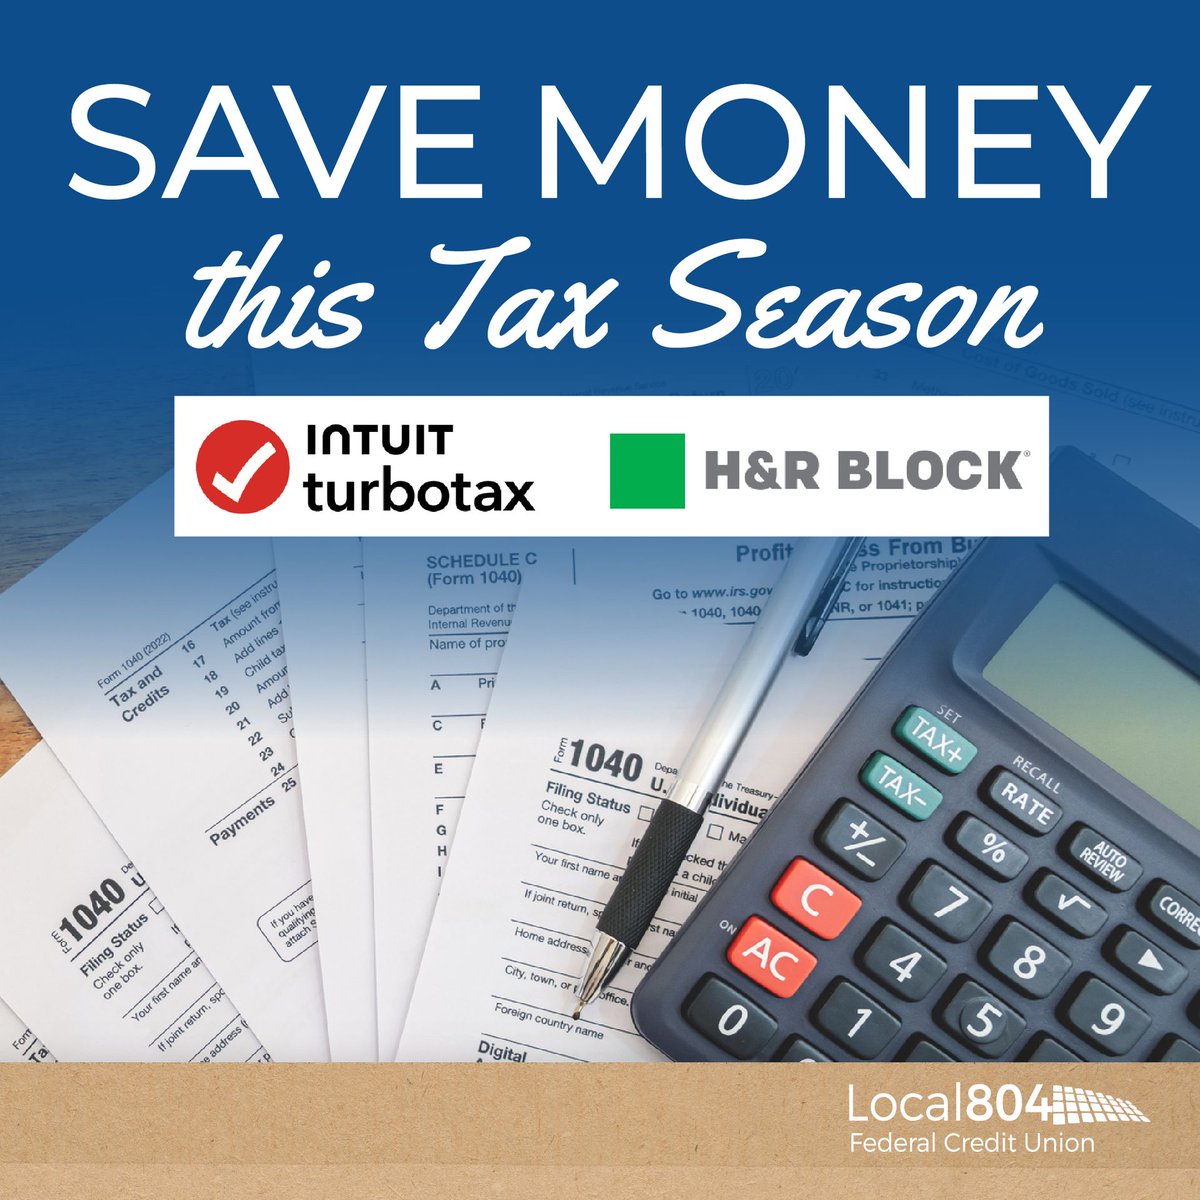 Maximize your Local 804 FCU membership this tax season! Access exclusive deals on tax solutions to make filing. Learn more: bit.ly/3vOiPPG #TeamstersLocal804 #Teamsters #UPS #local447IAMAW @Teamsters_Local_804 @804_Local